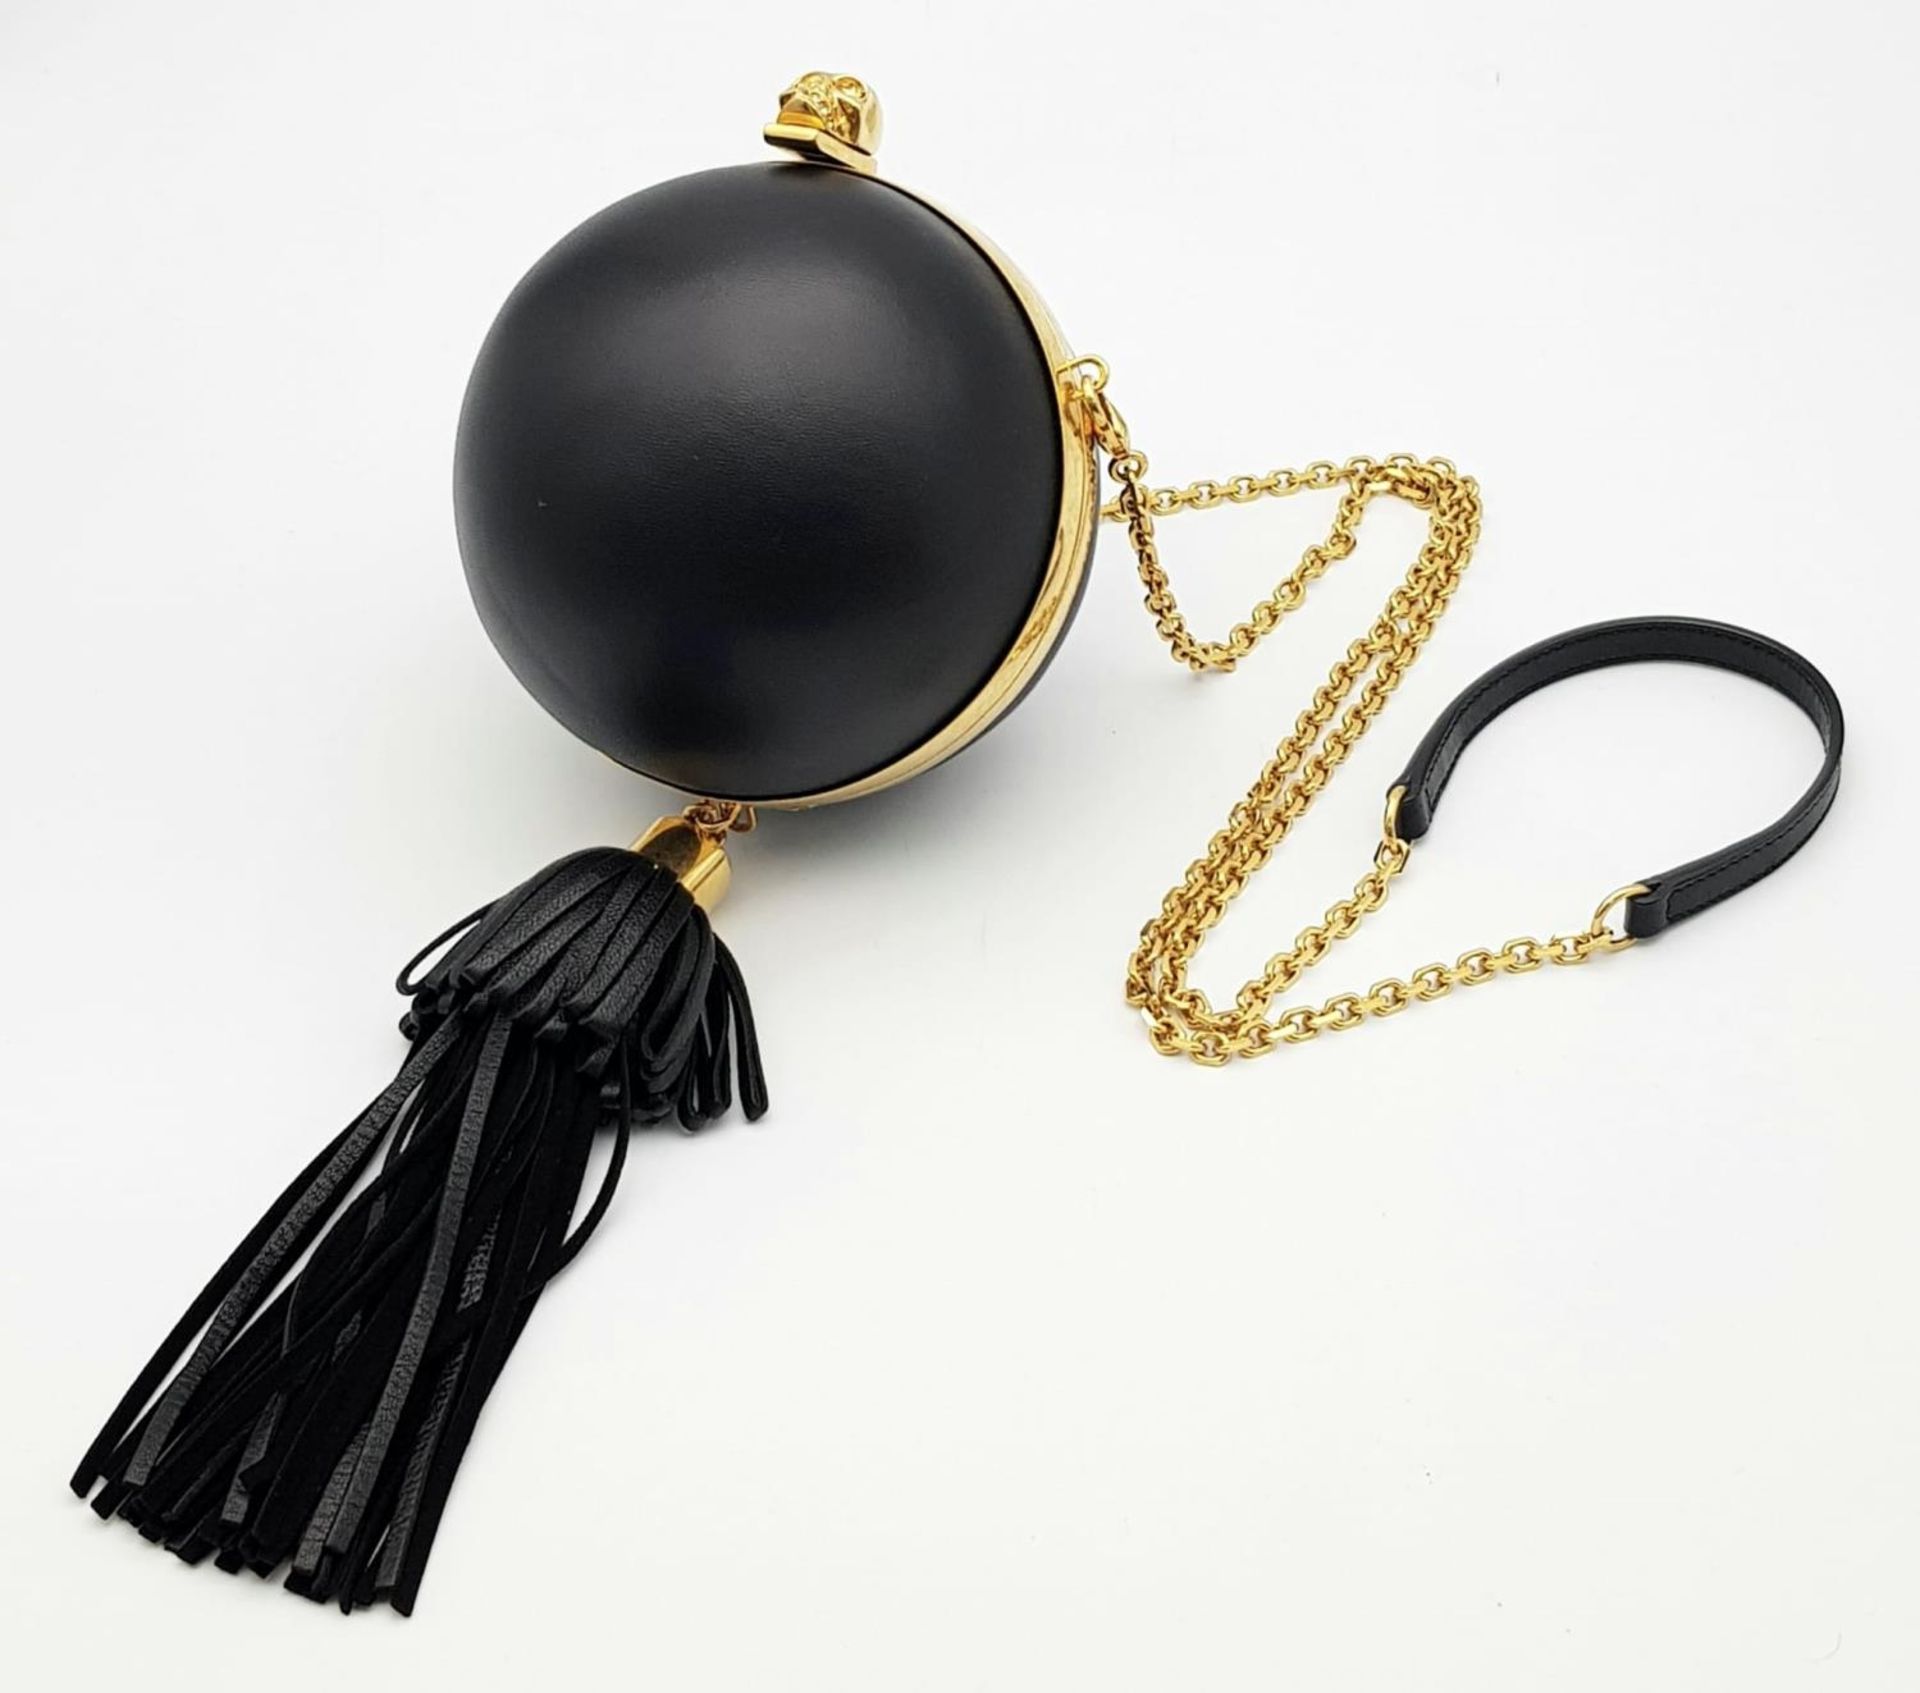 An Alexander Mcqueen Skull Ball Clutch Bag. Black leather exterior with gold tone hardware.